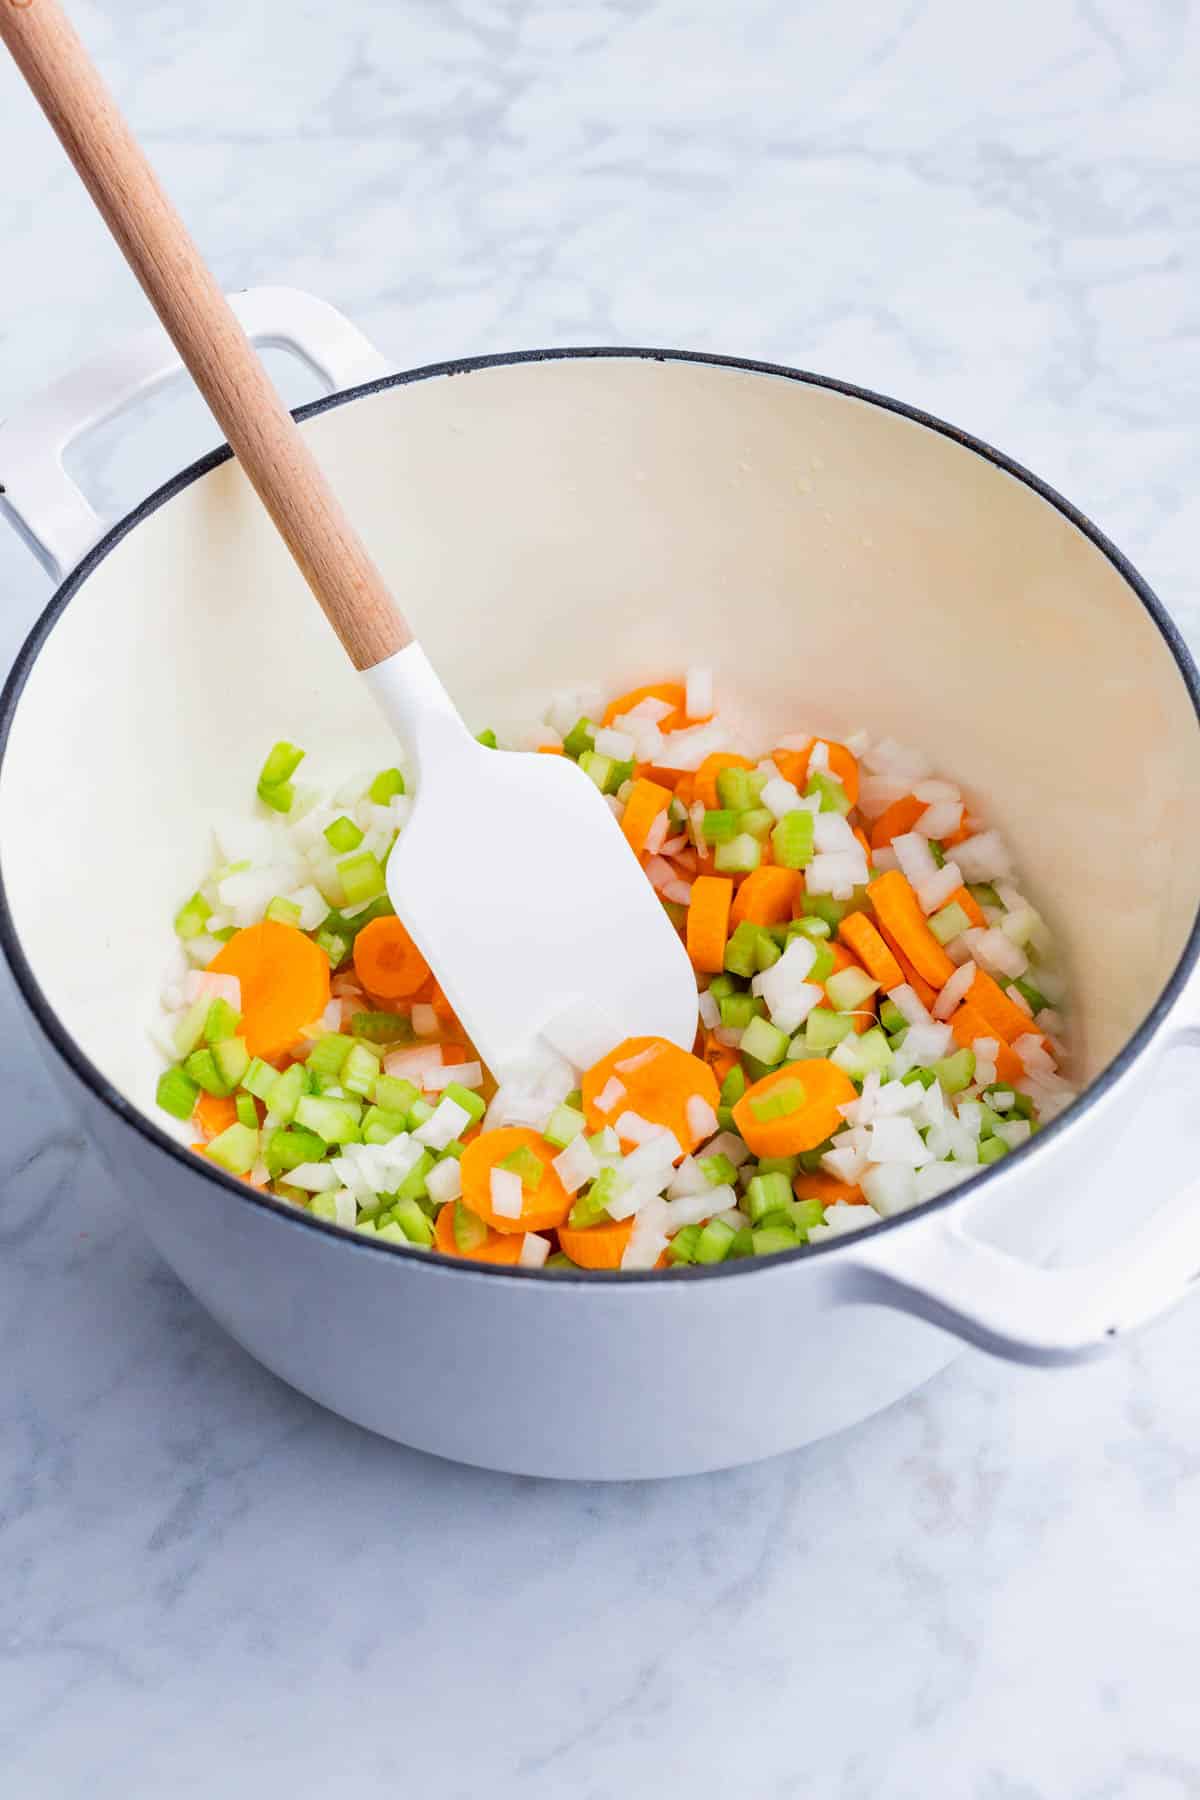 Onion, carrots, and celery are cooked in butter in the Dutch oven.